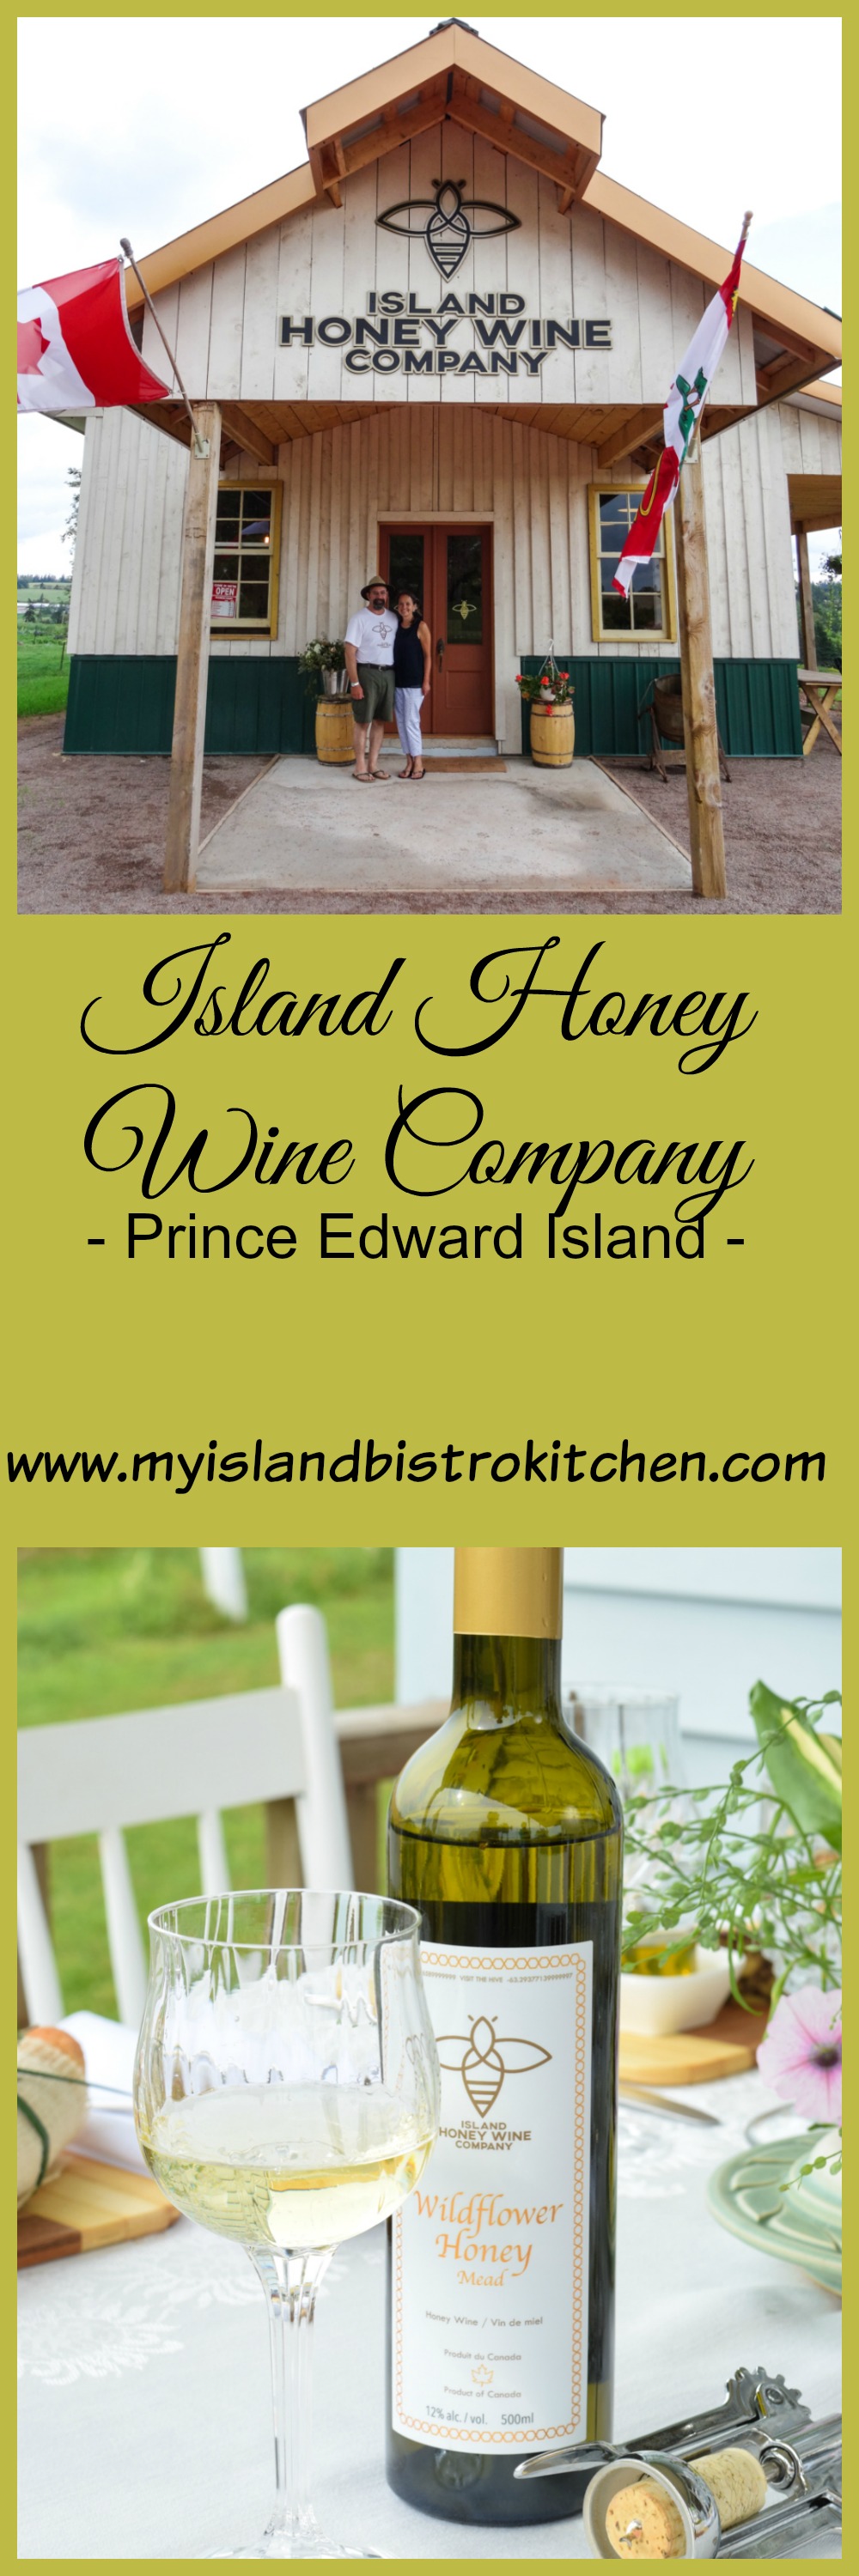 Island Honey Wine Company, Wheatley River, PEI, is PEI's first meadery dedicated to making mead with fermented honey and flowers and fruits from its own farm